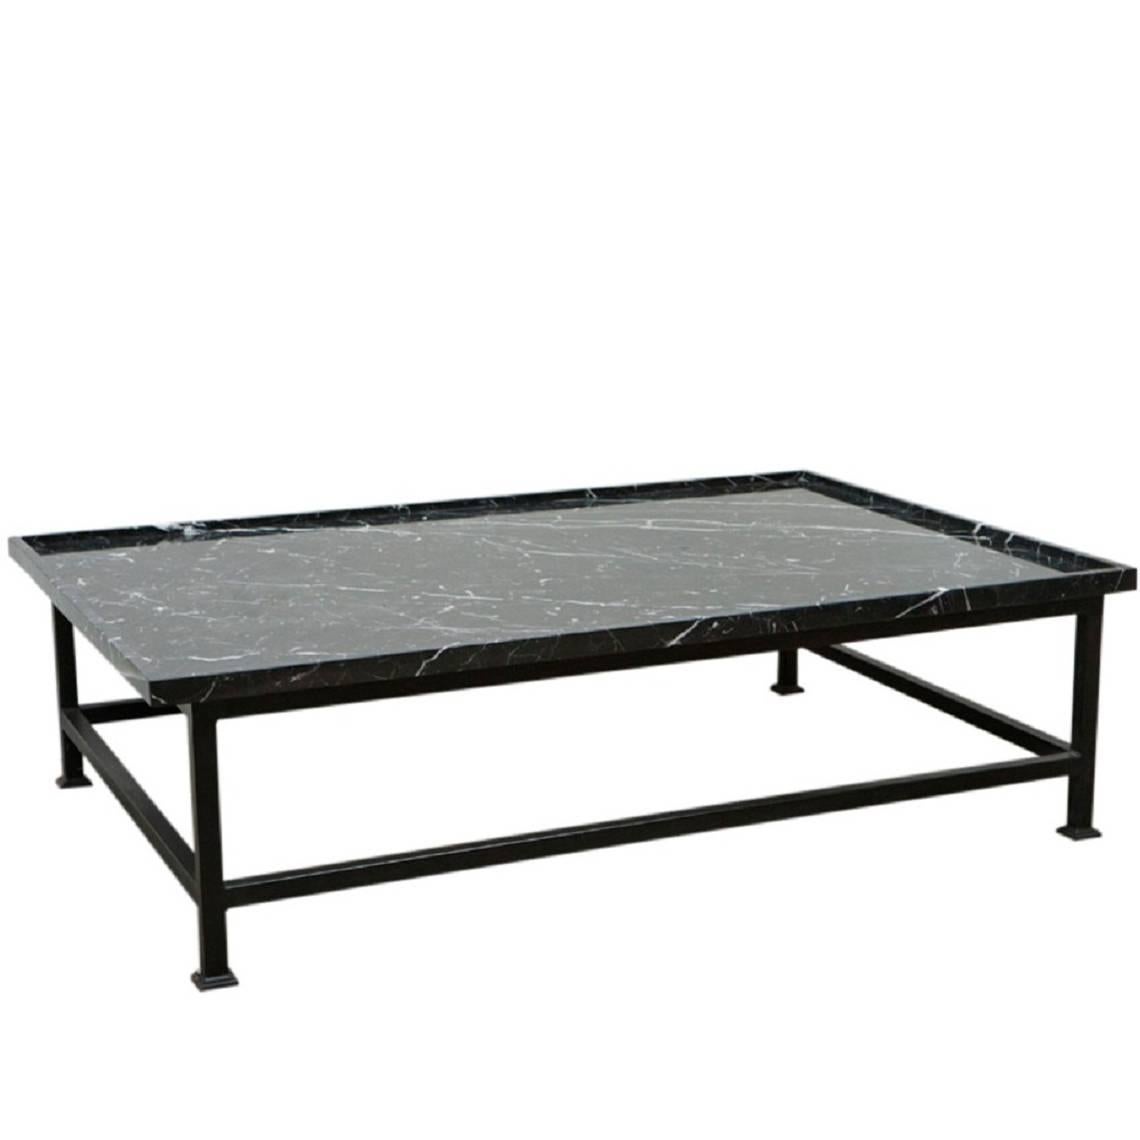 Harbinger Simple Iron Base Coffee Table with Stone Top For Sale